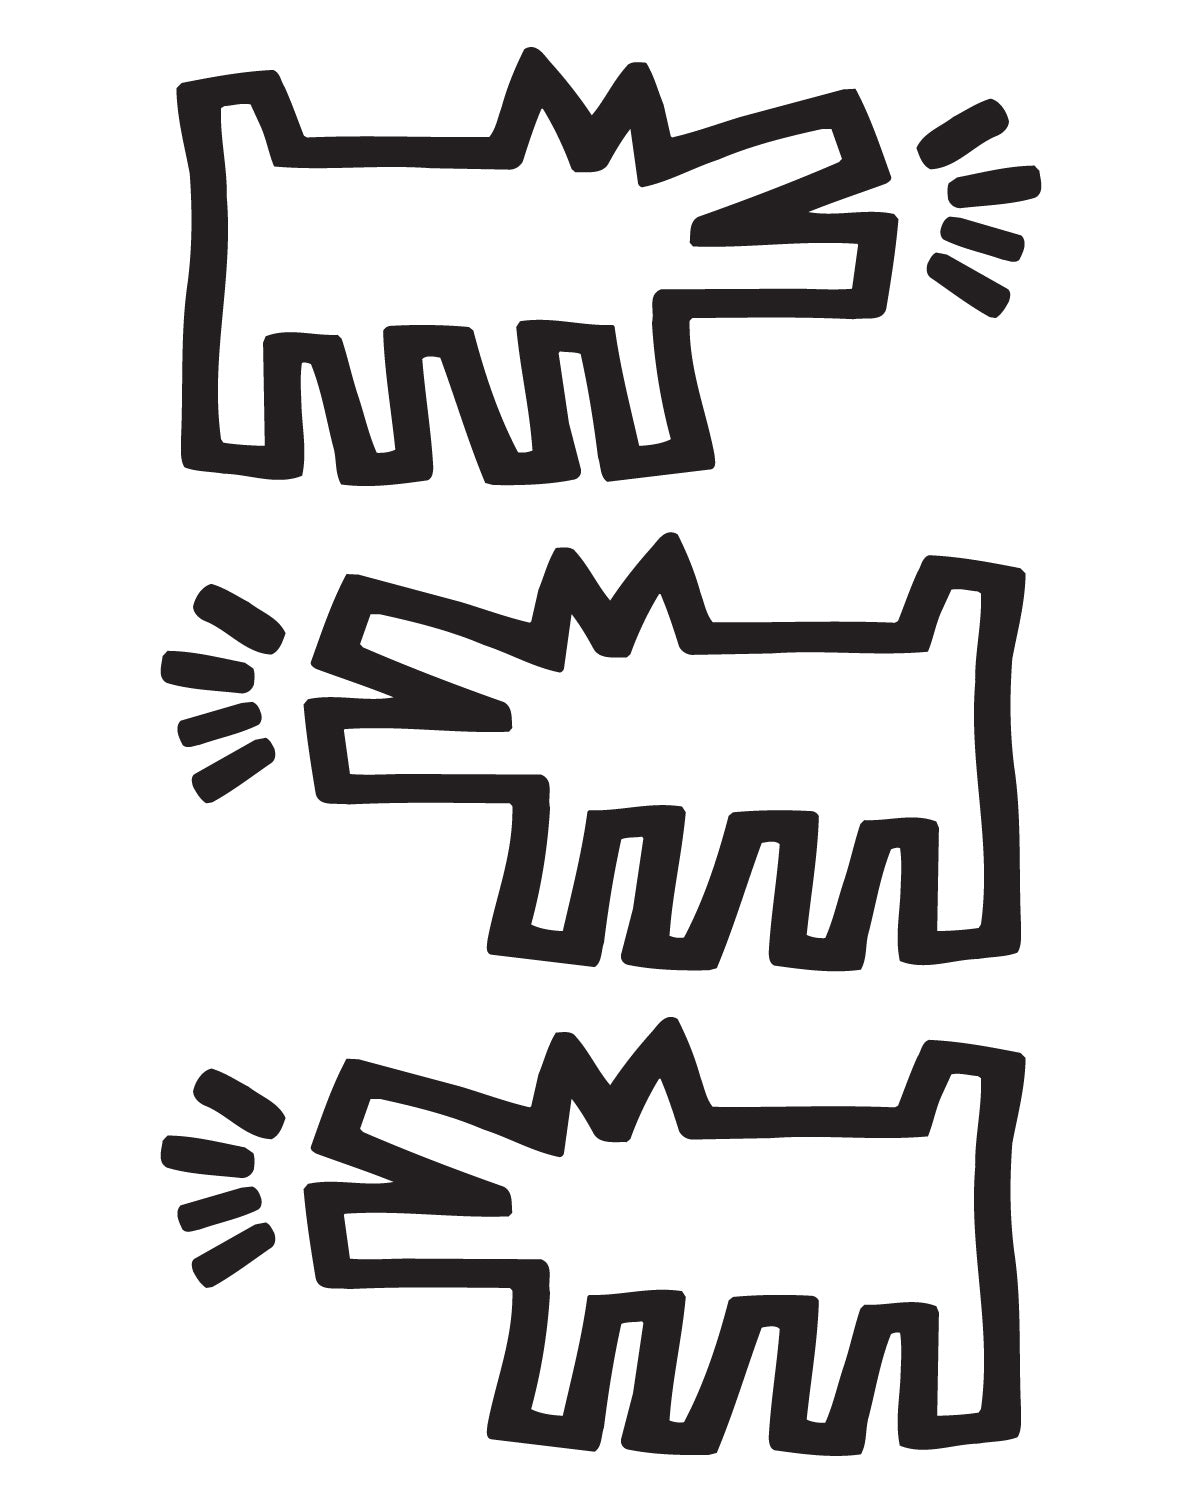 Keith Haring Wall Stickers, Barking Dogs Wall Decals